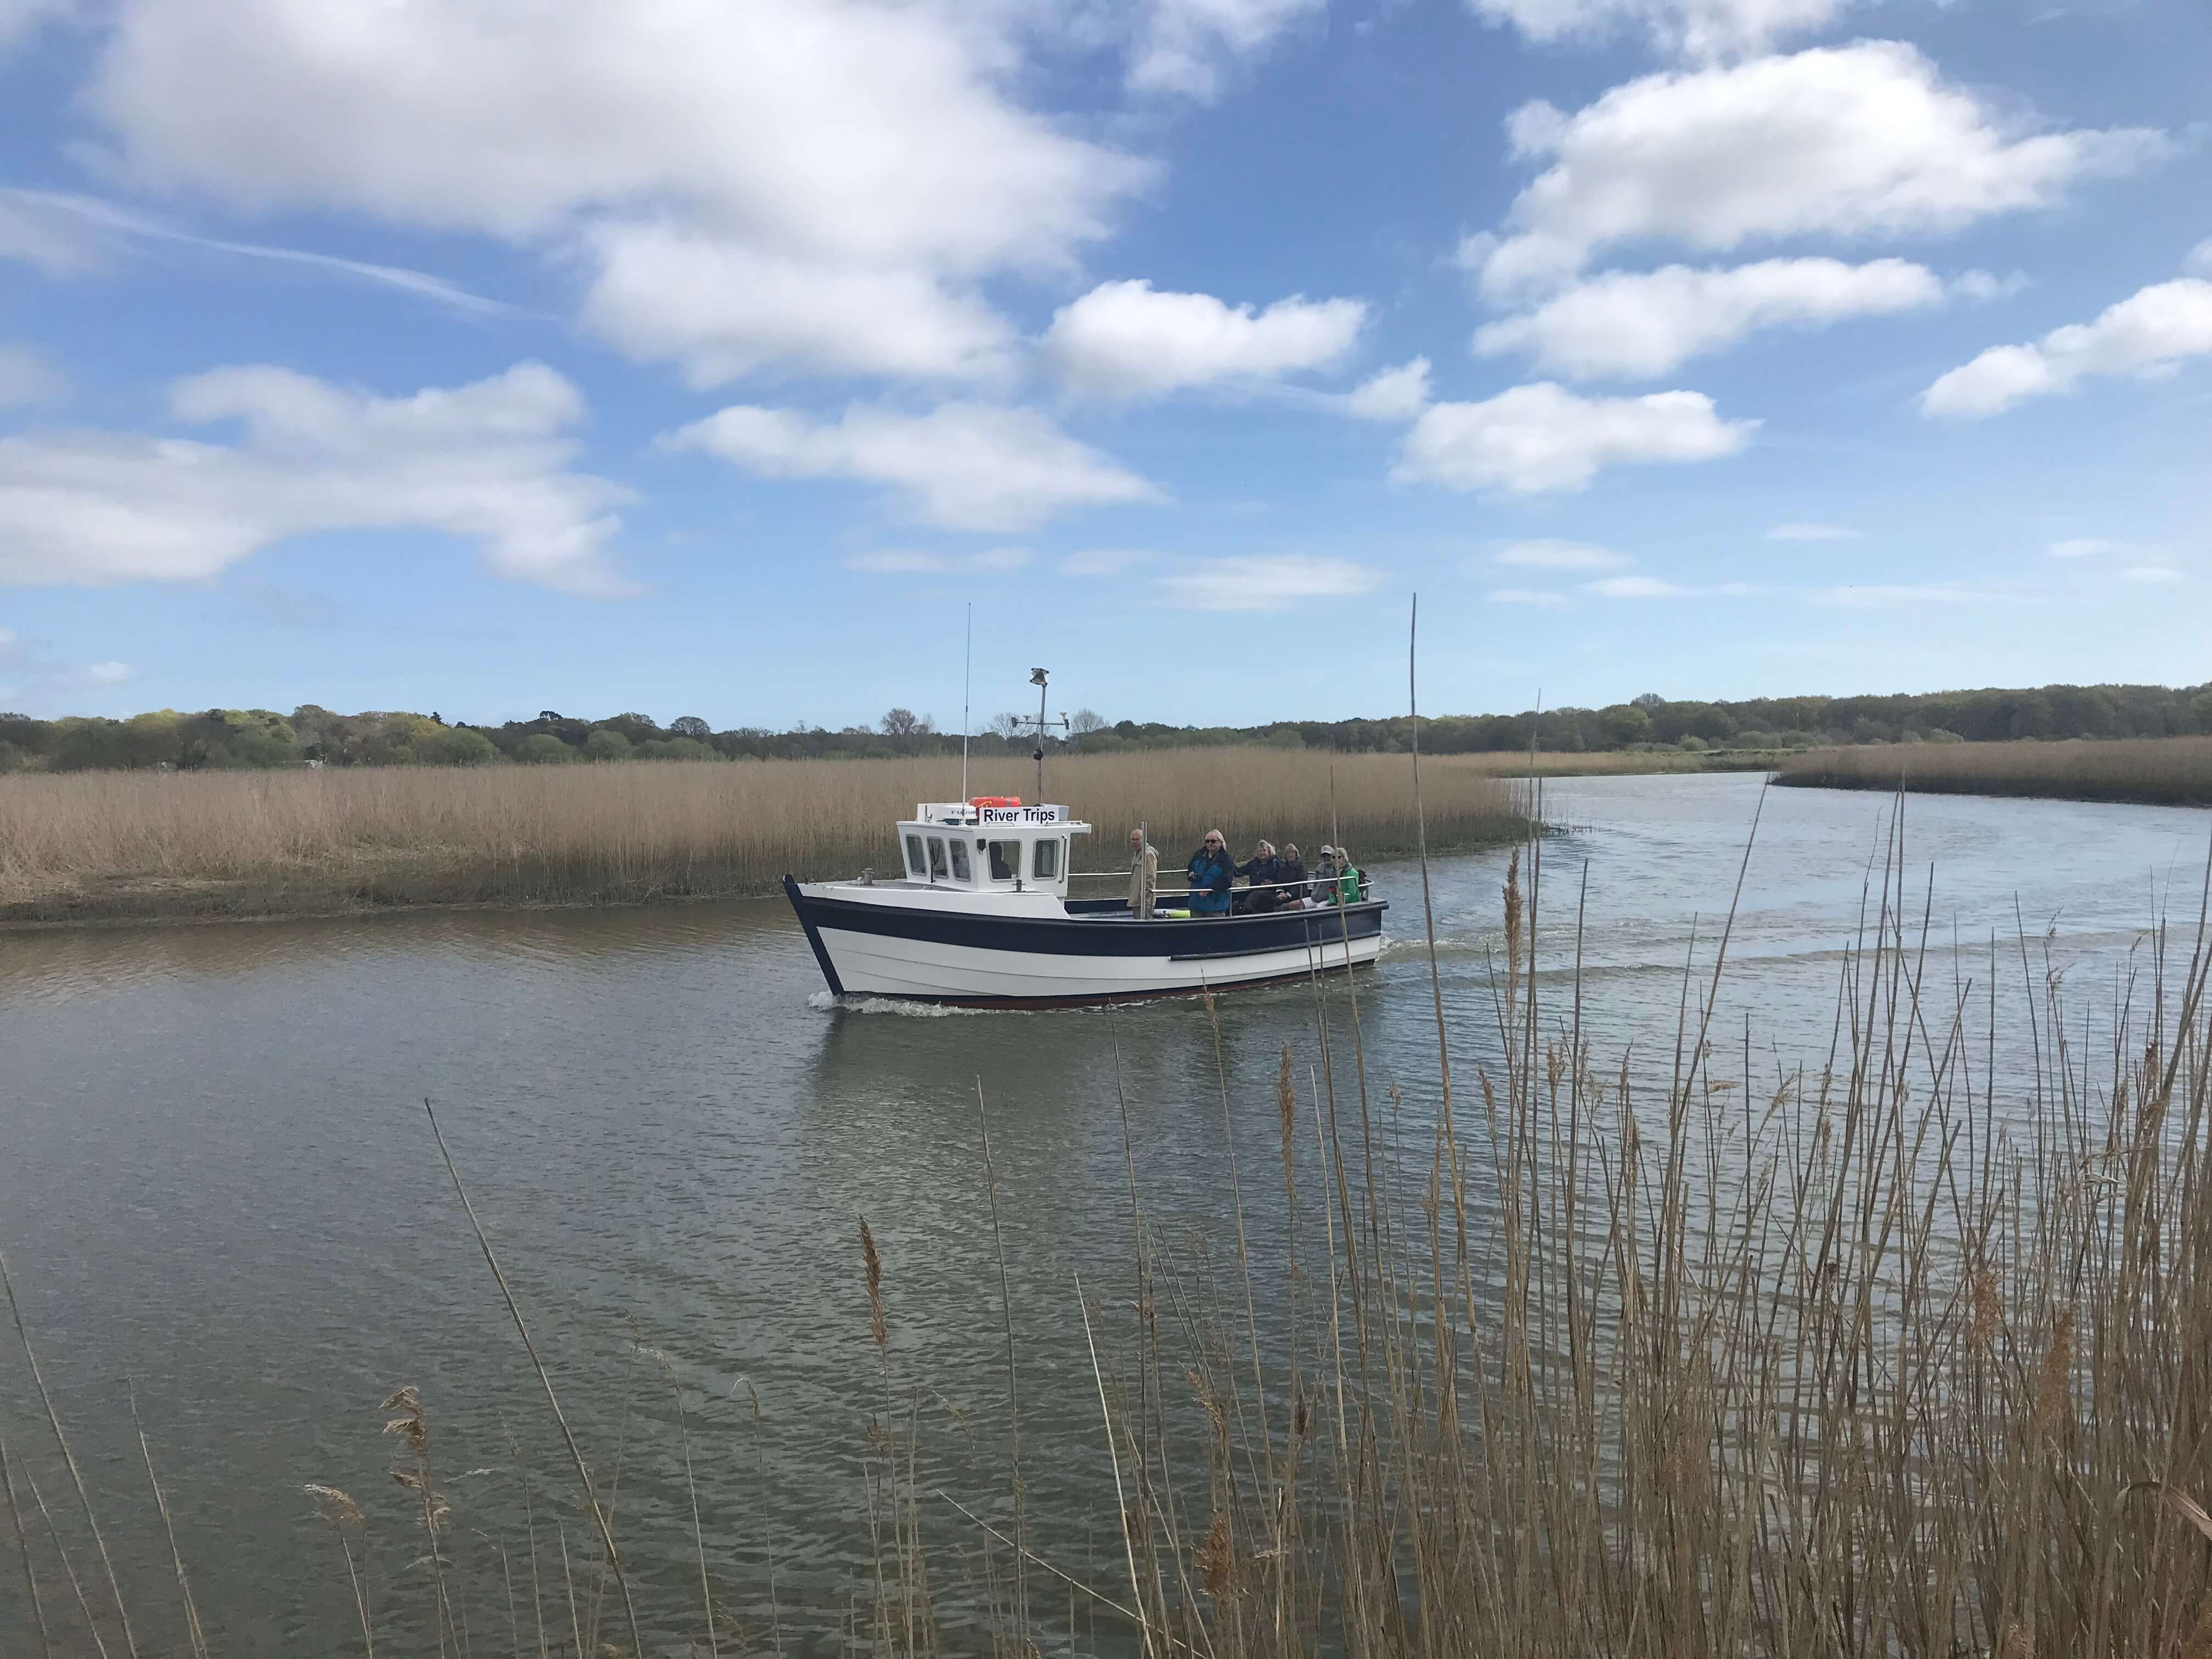 The Tilly Too on the water between reed banks on the river Alde